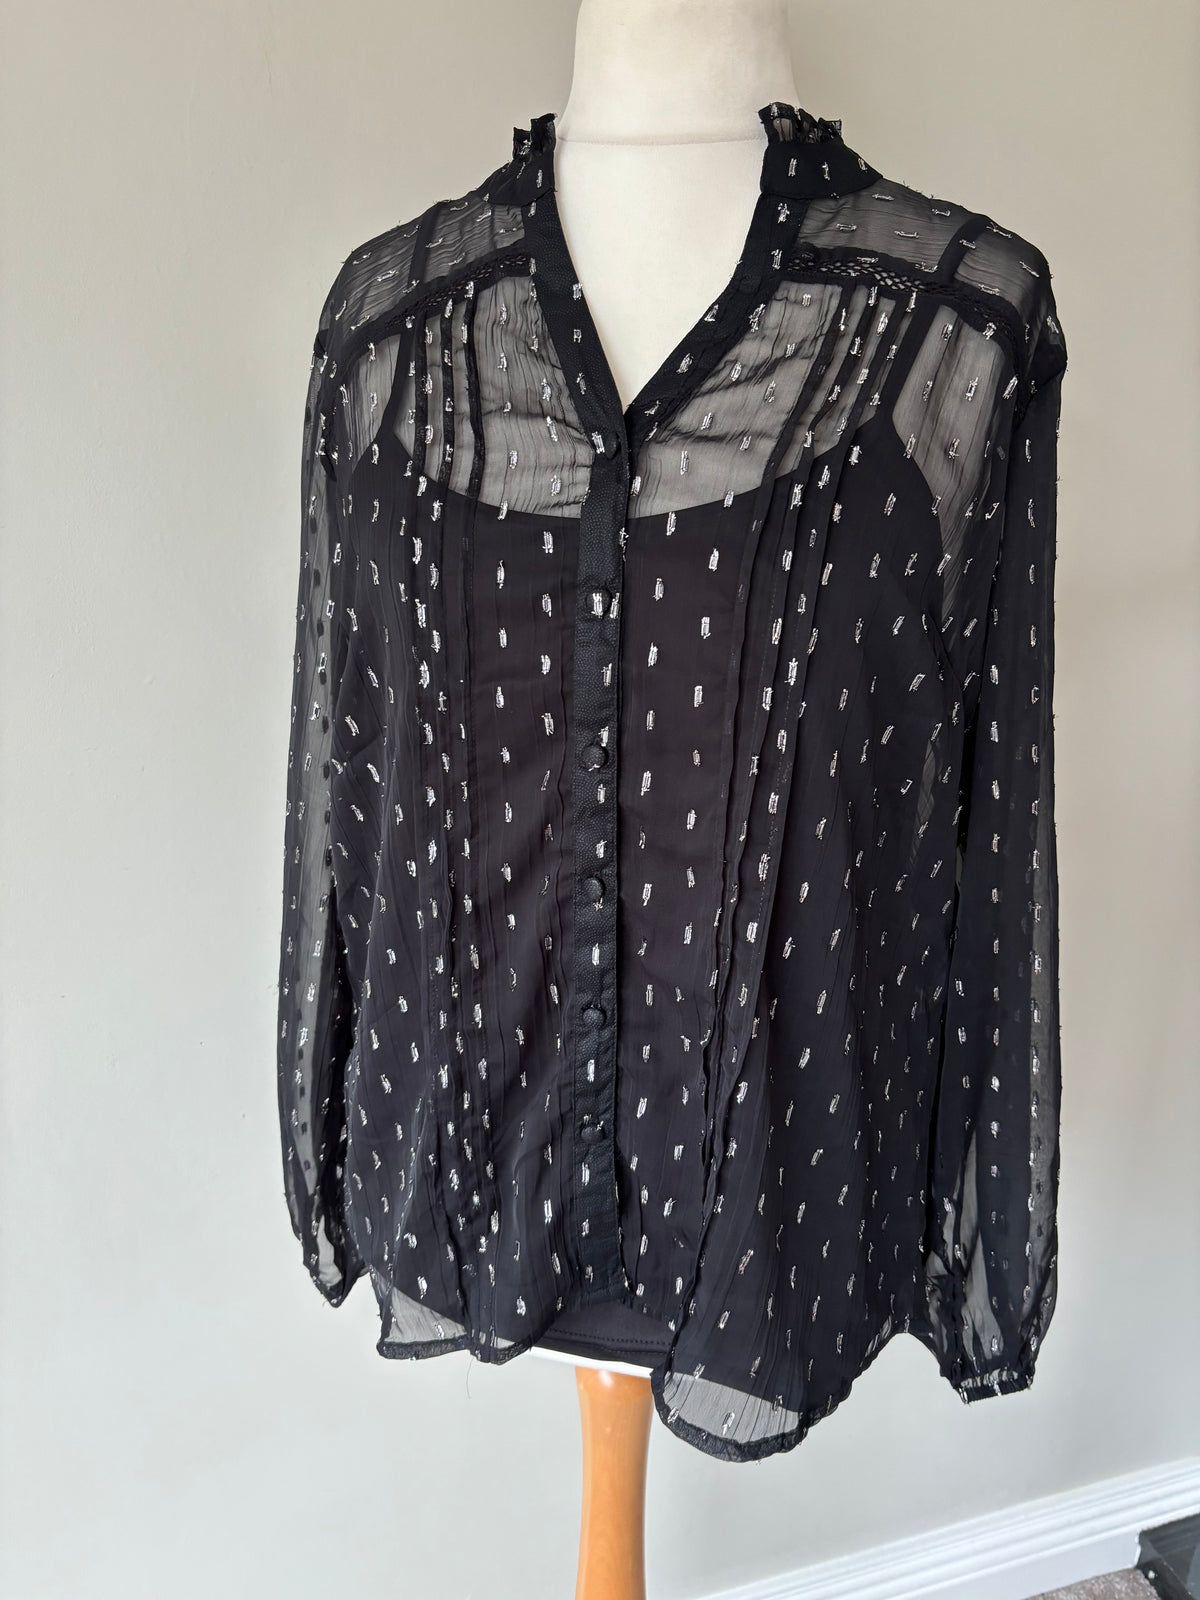 Sheer top with Vest by Joe Browns Size 16